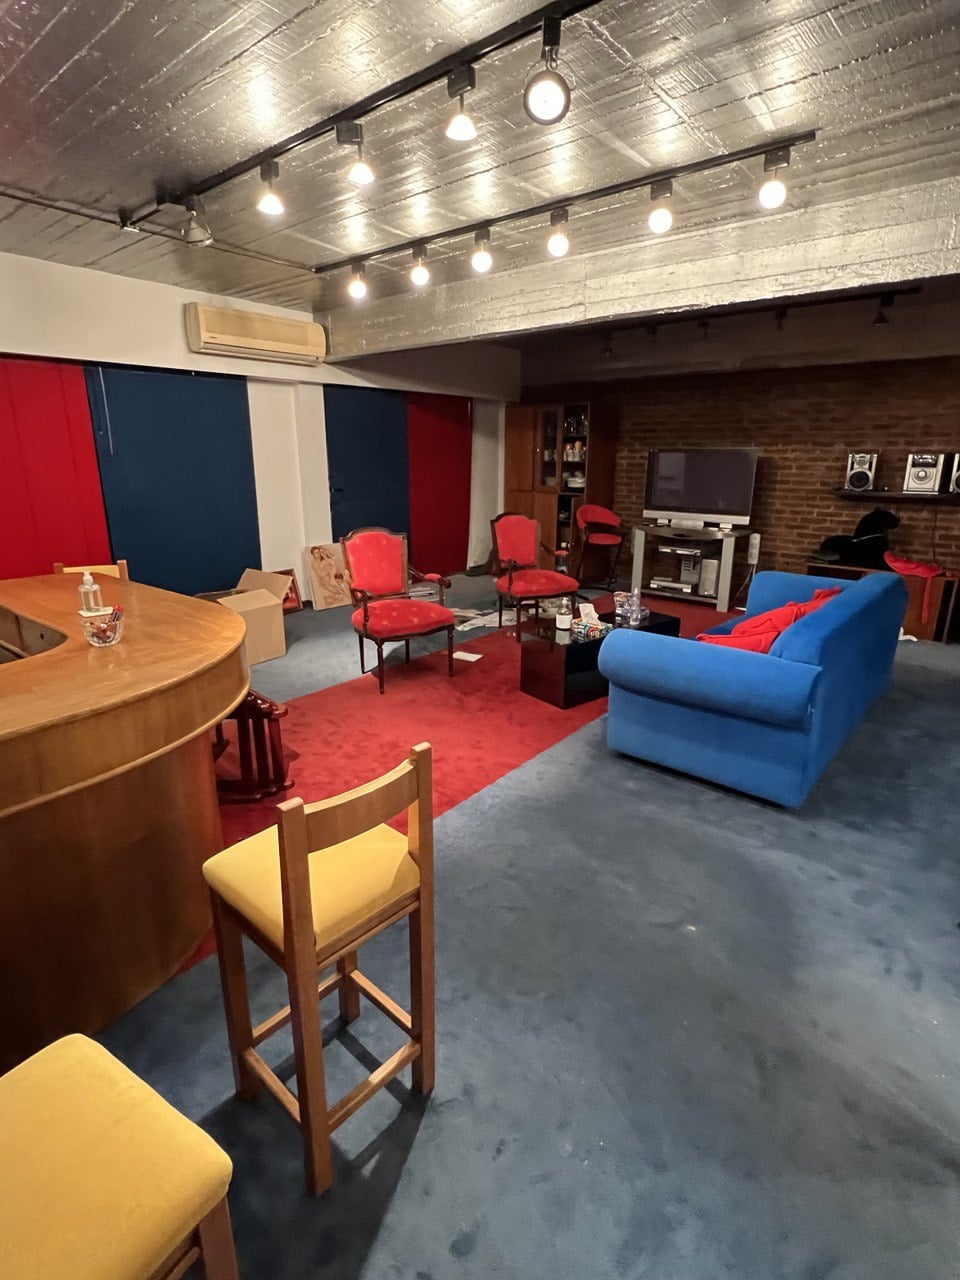 The so-called “museum of sex” apartment on the ninth floor. Its bright colors, which the owner chose believing they inspired strength and energy, were curiously taken by the judge and the media as “evidence of prostitution.”